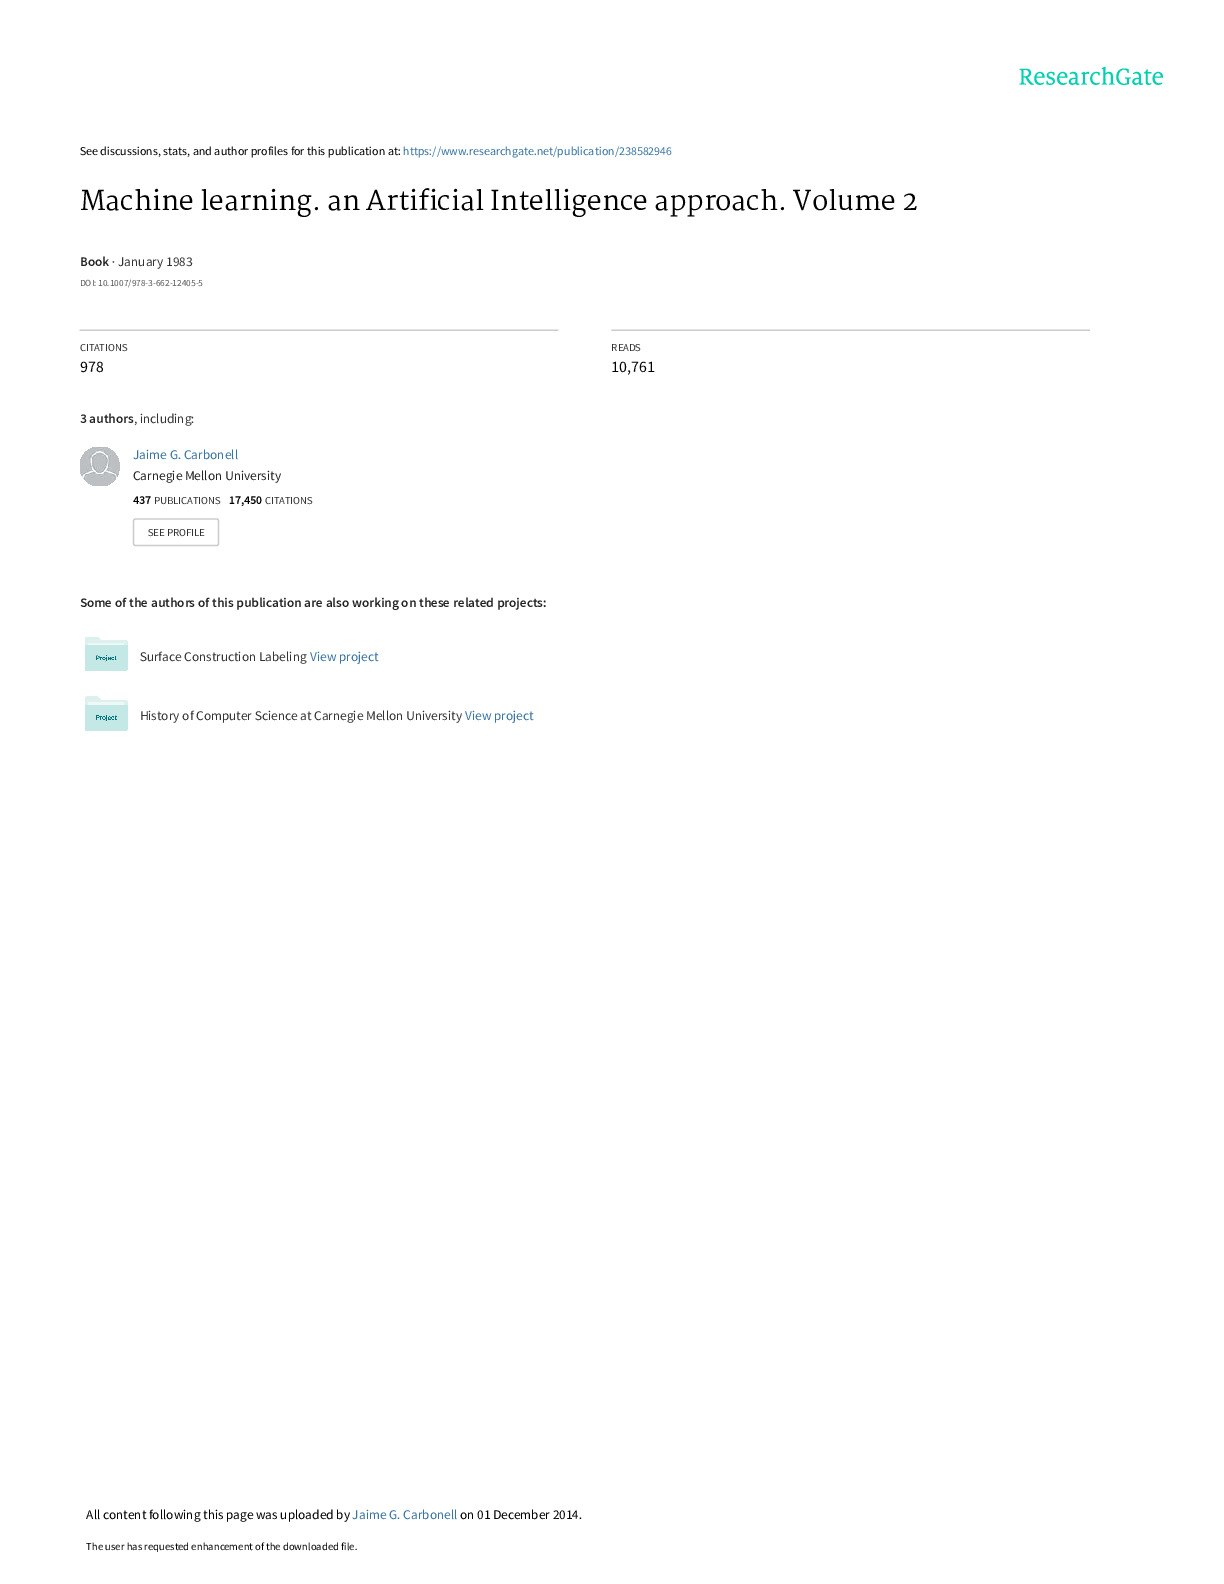 Machine_learning_an_Artificial_Intelligence_approa